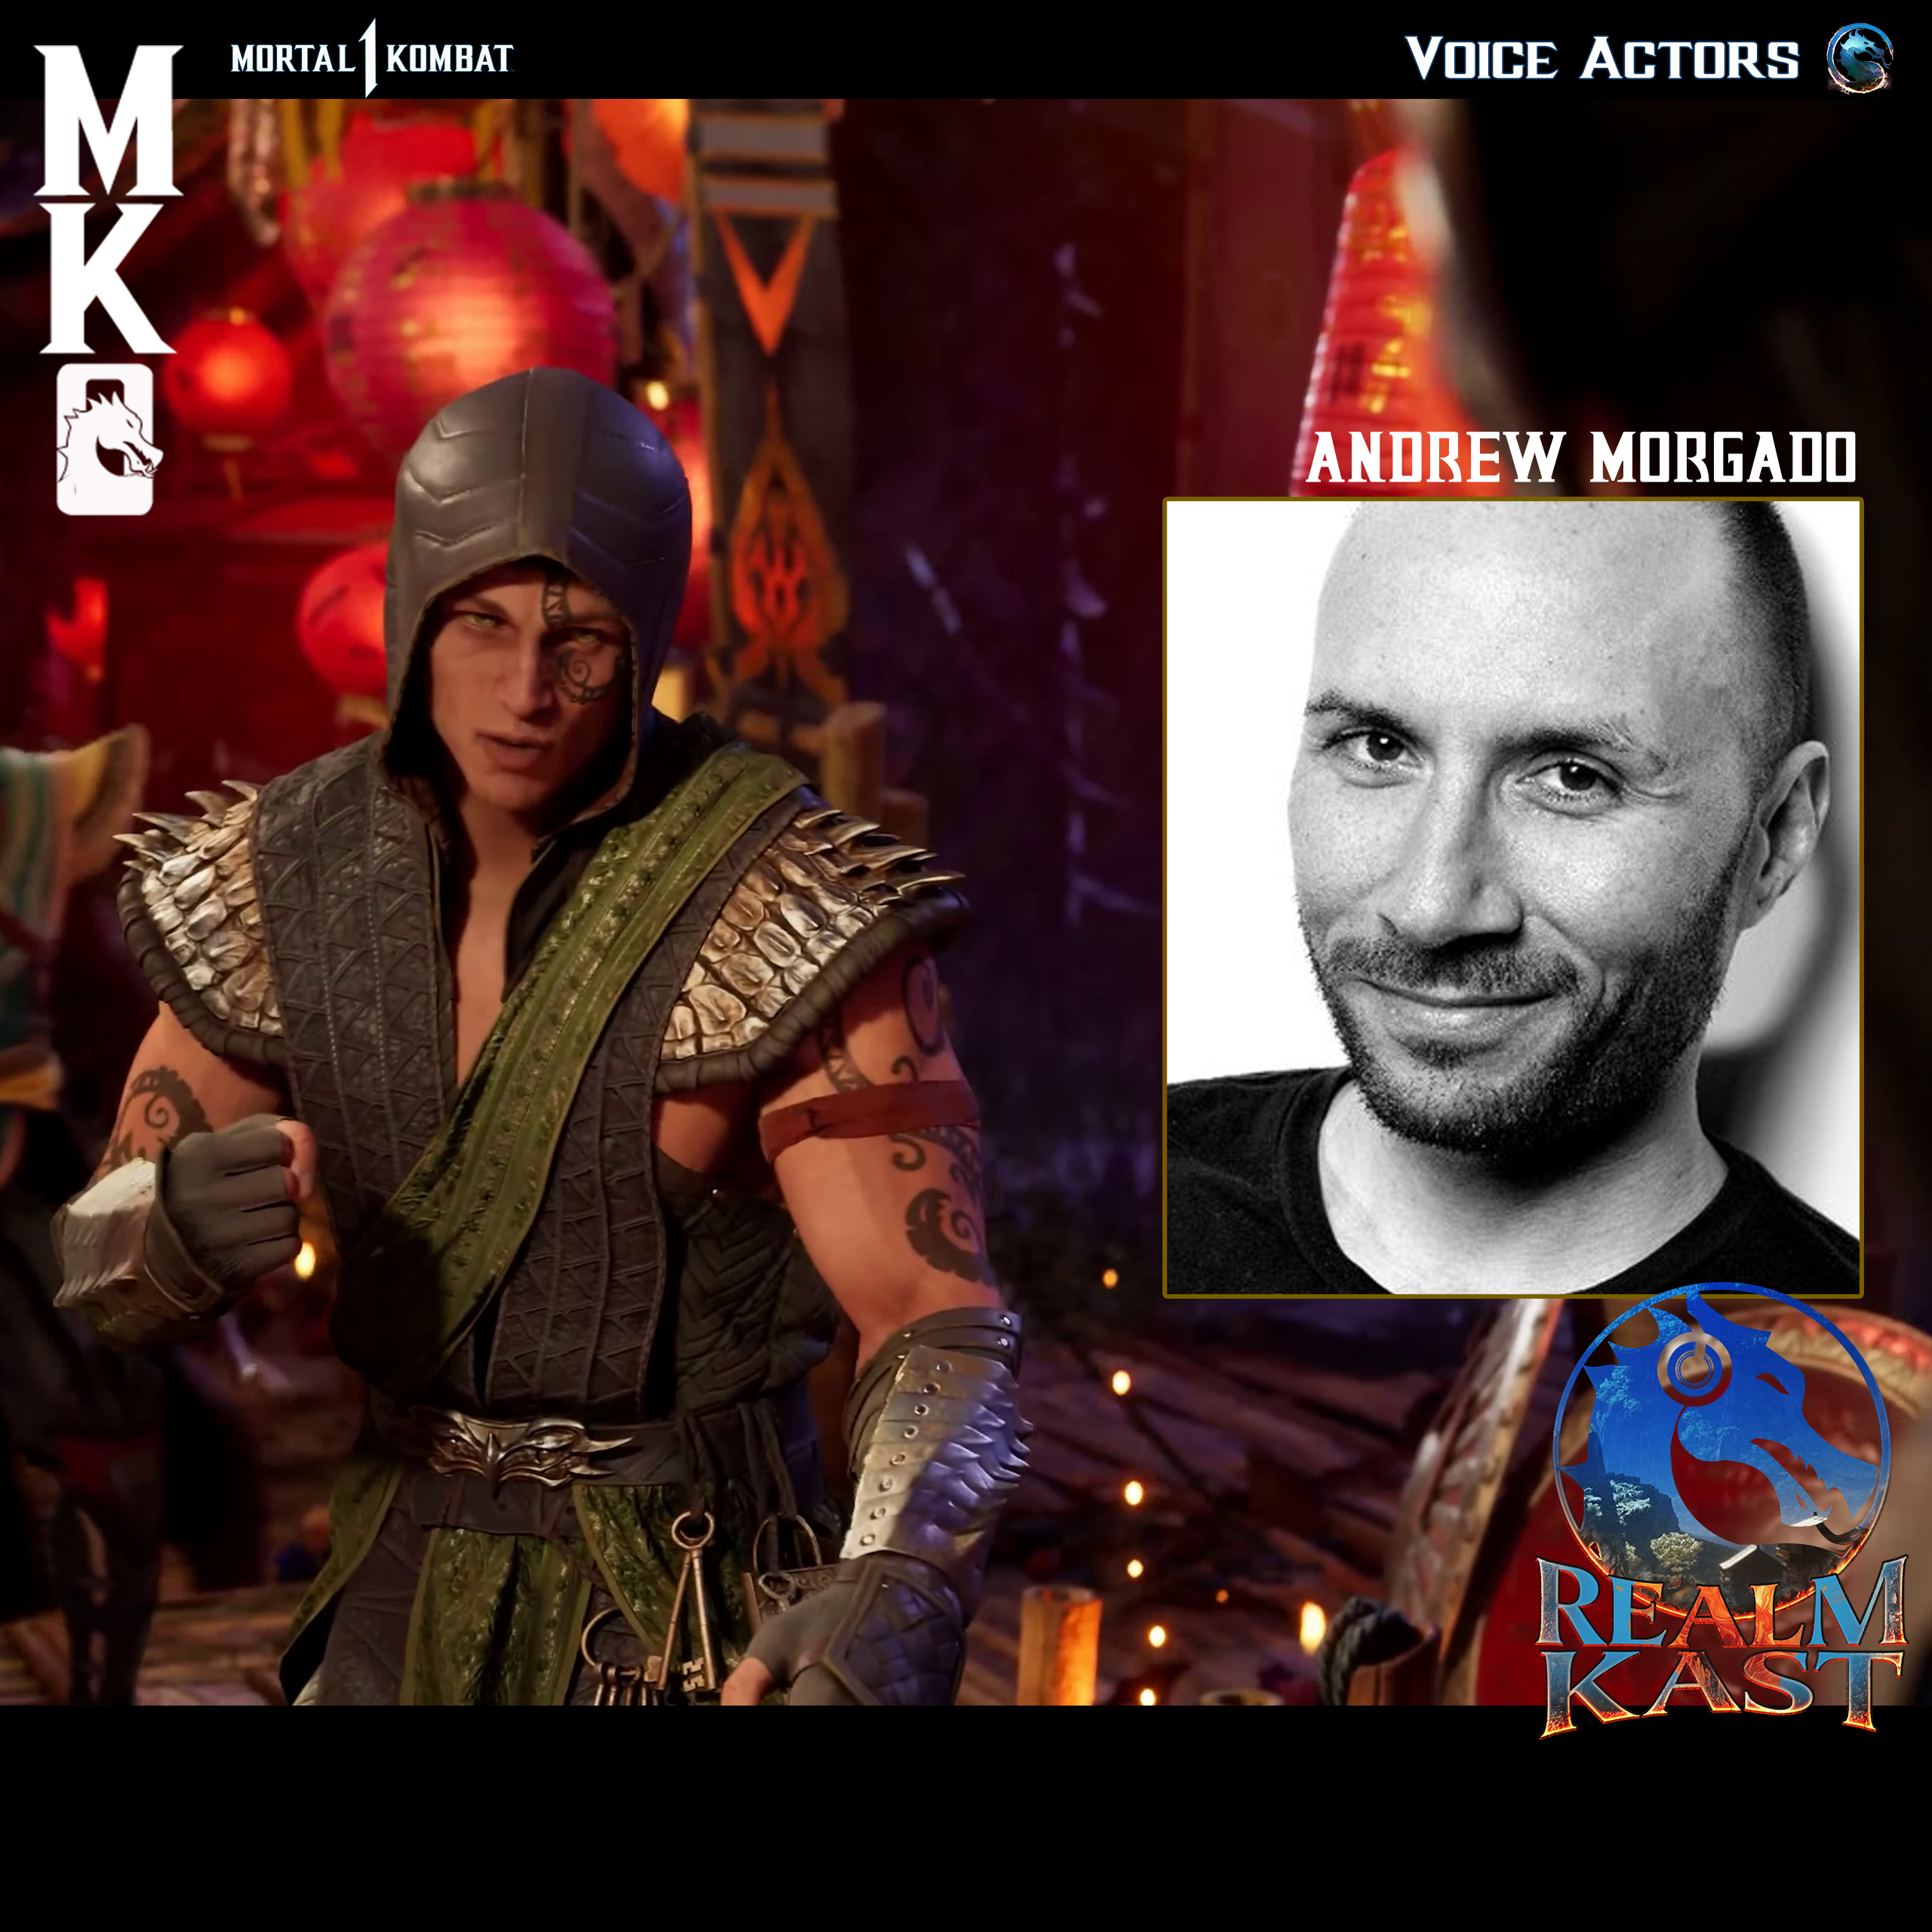 The Realm Kast: Mortal Kombat Online on X: "🐍 The venomous voice of  Reptile is ready to strike in MK1, portrayed by the talented @MorgadoAndrew  ! 🐍 He returns to the series